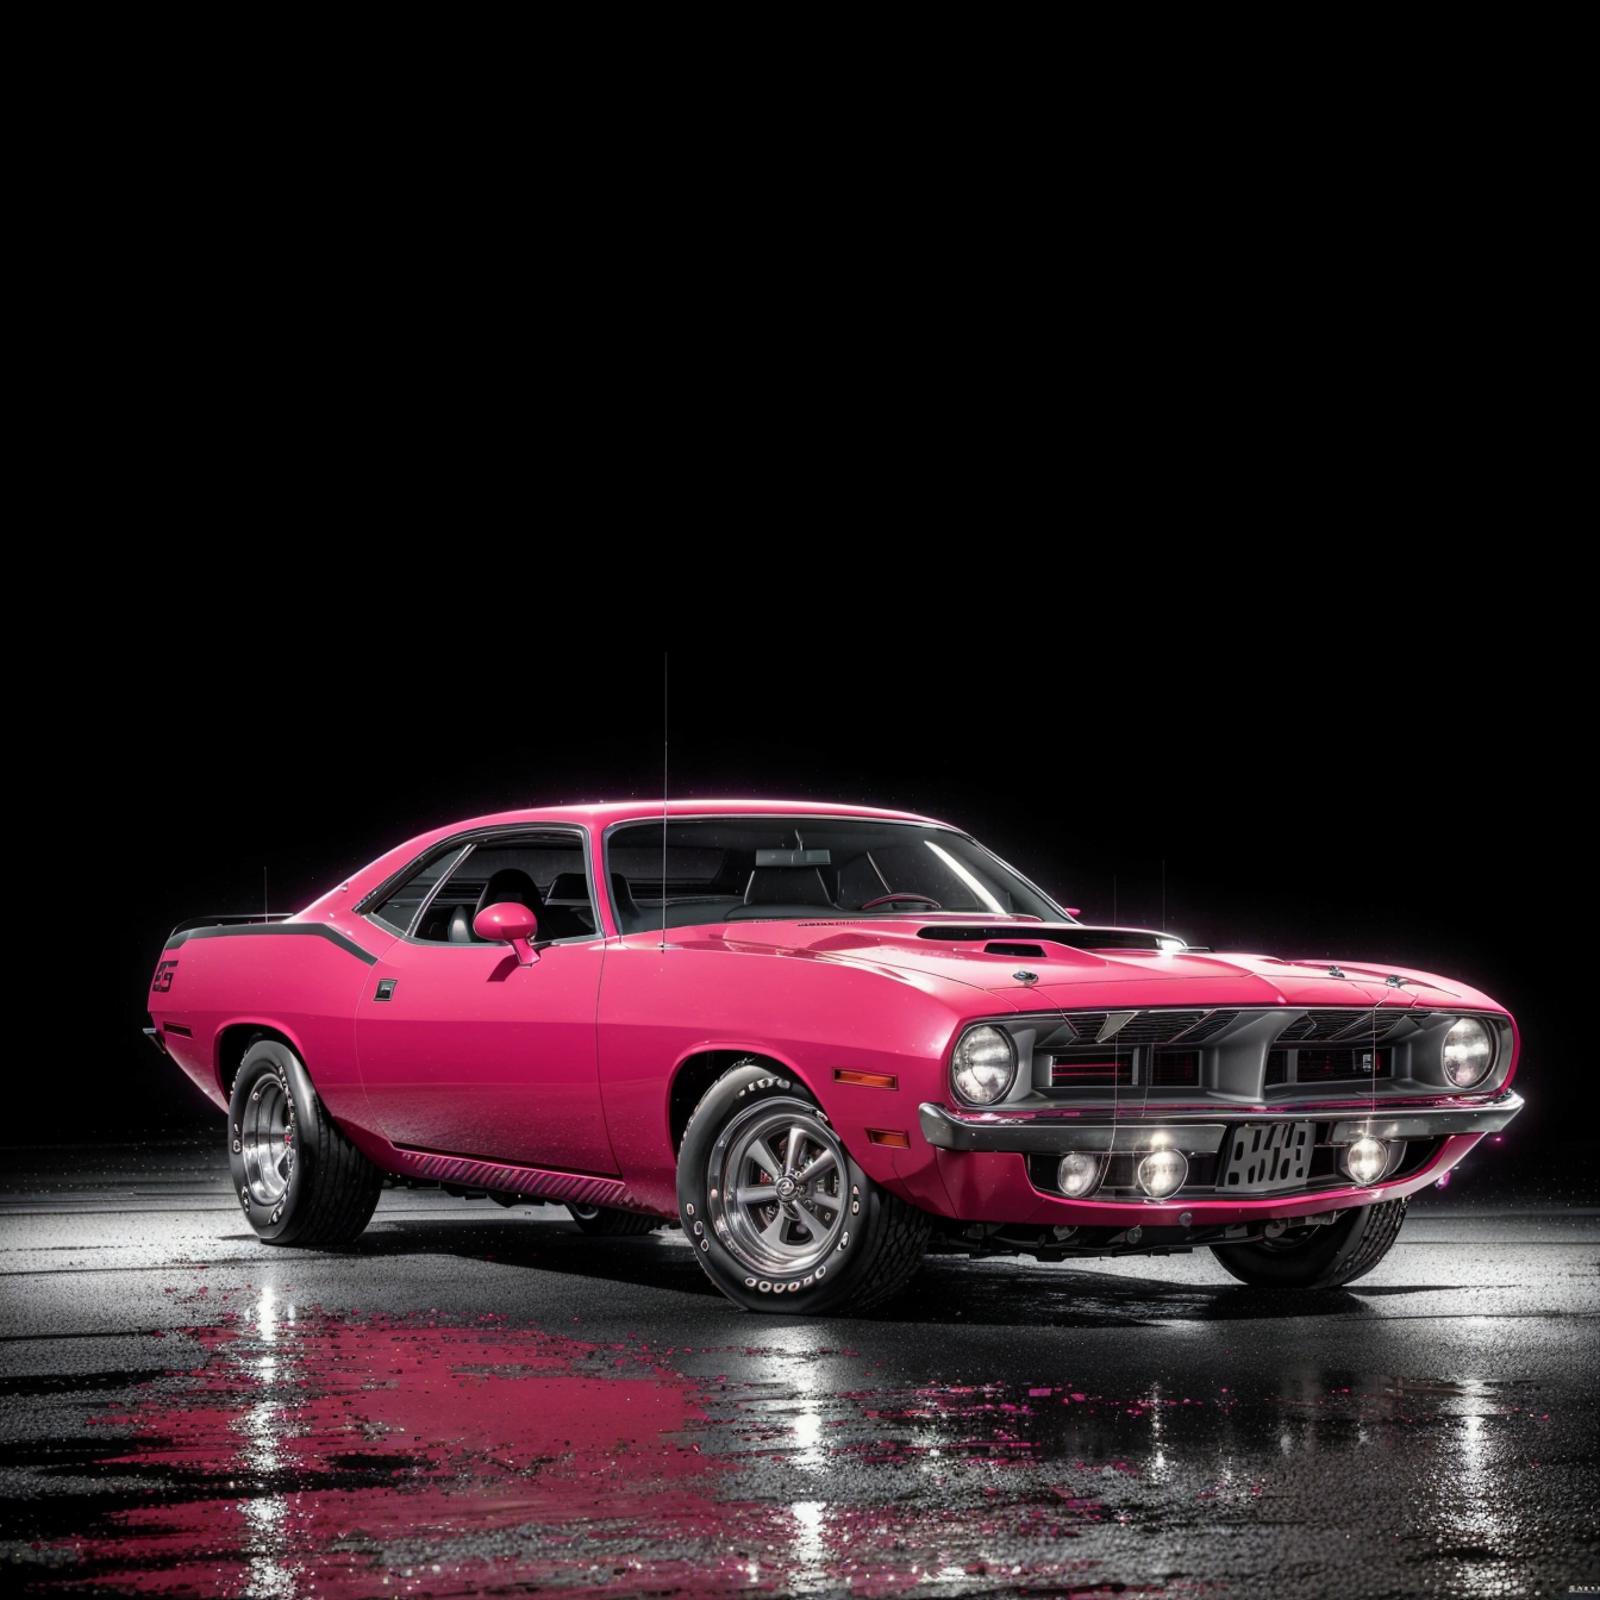 1970 Plymouth Barracuda image by Diffuzed_ai